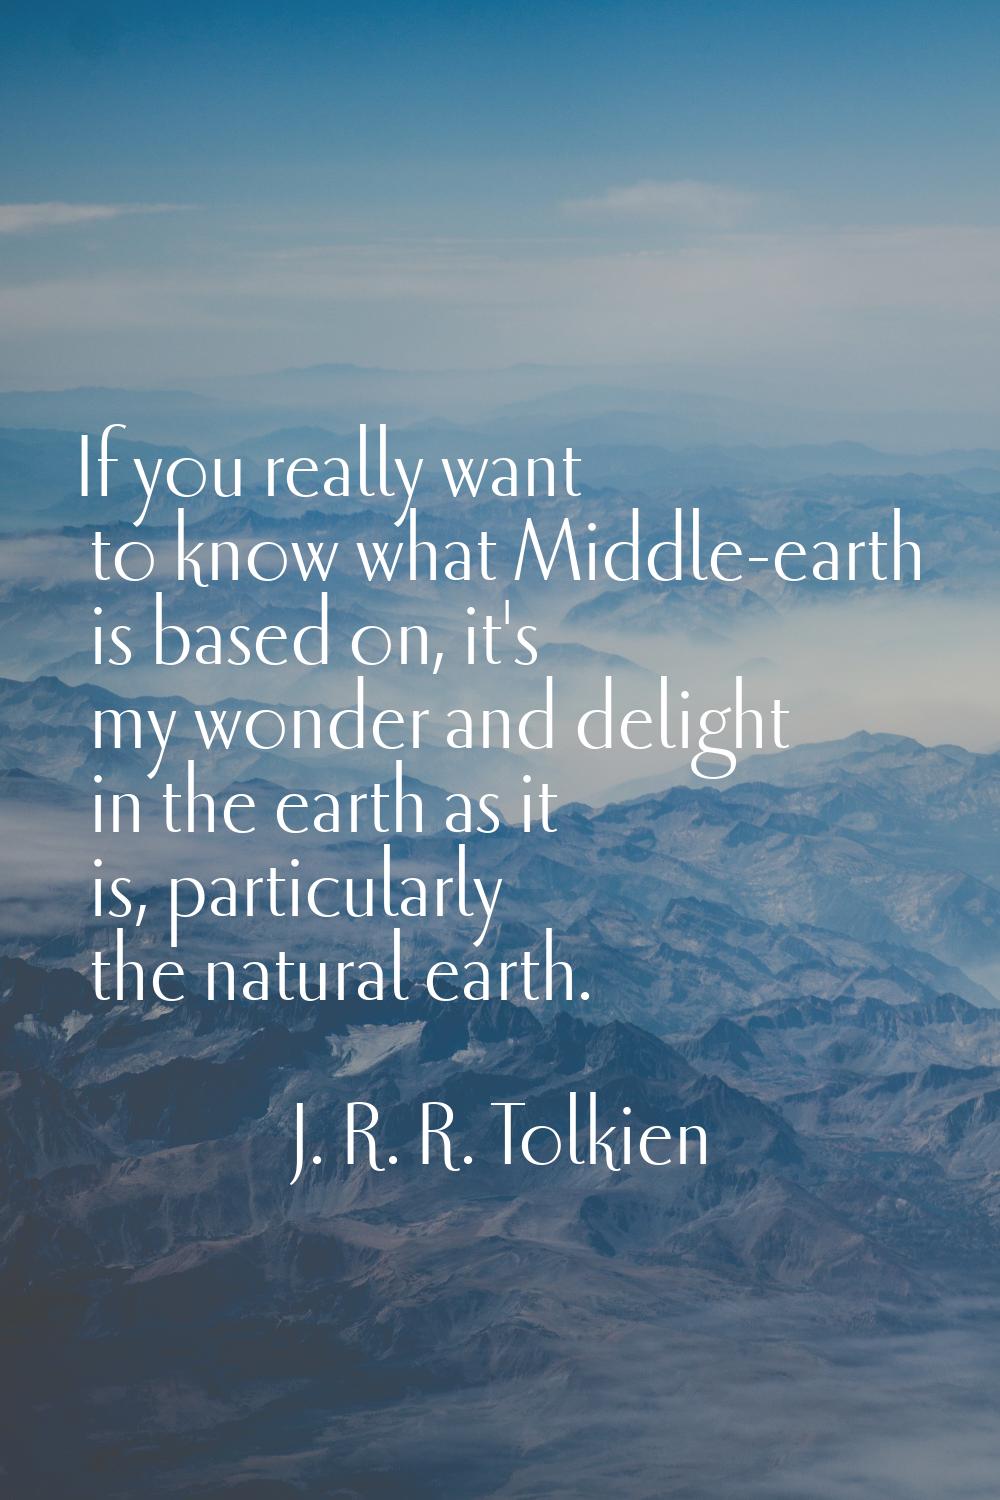 If you really want to know what Middle-earth is based on, it's my wonder and delight in the earth a